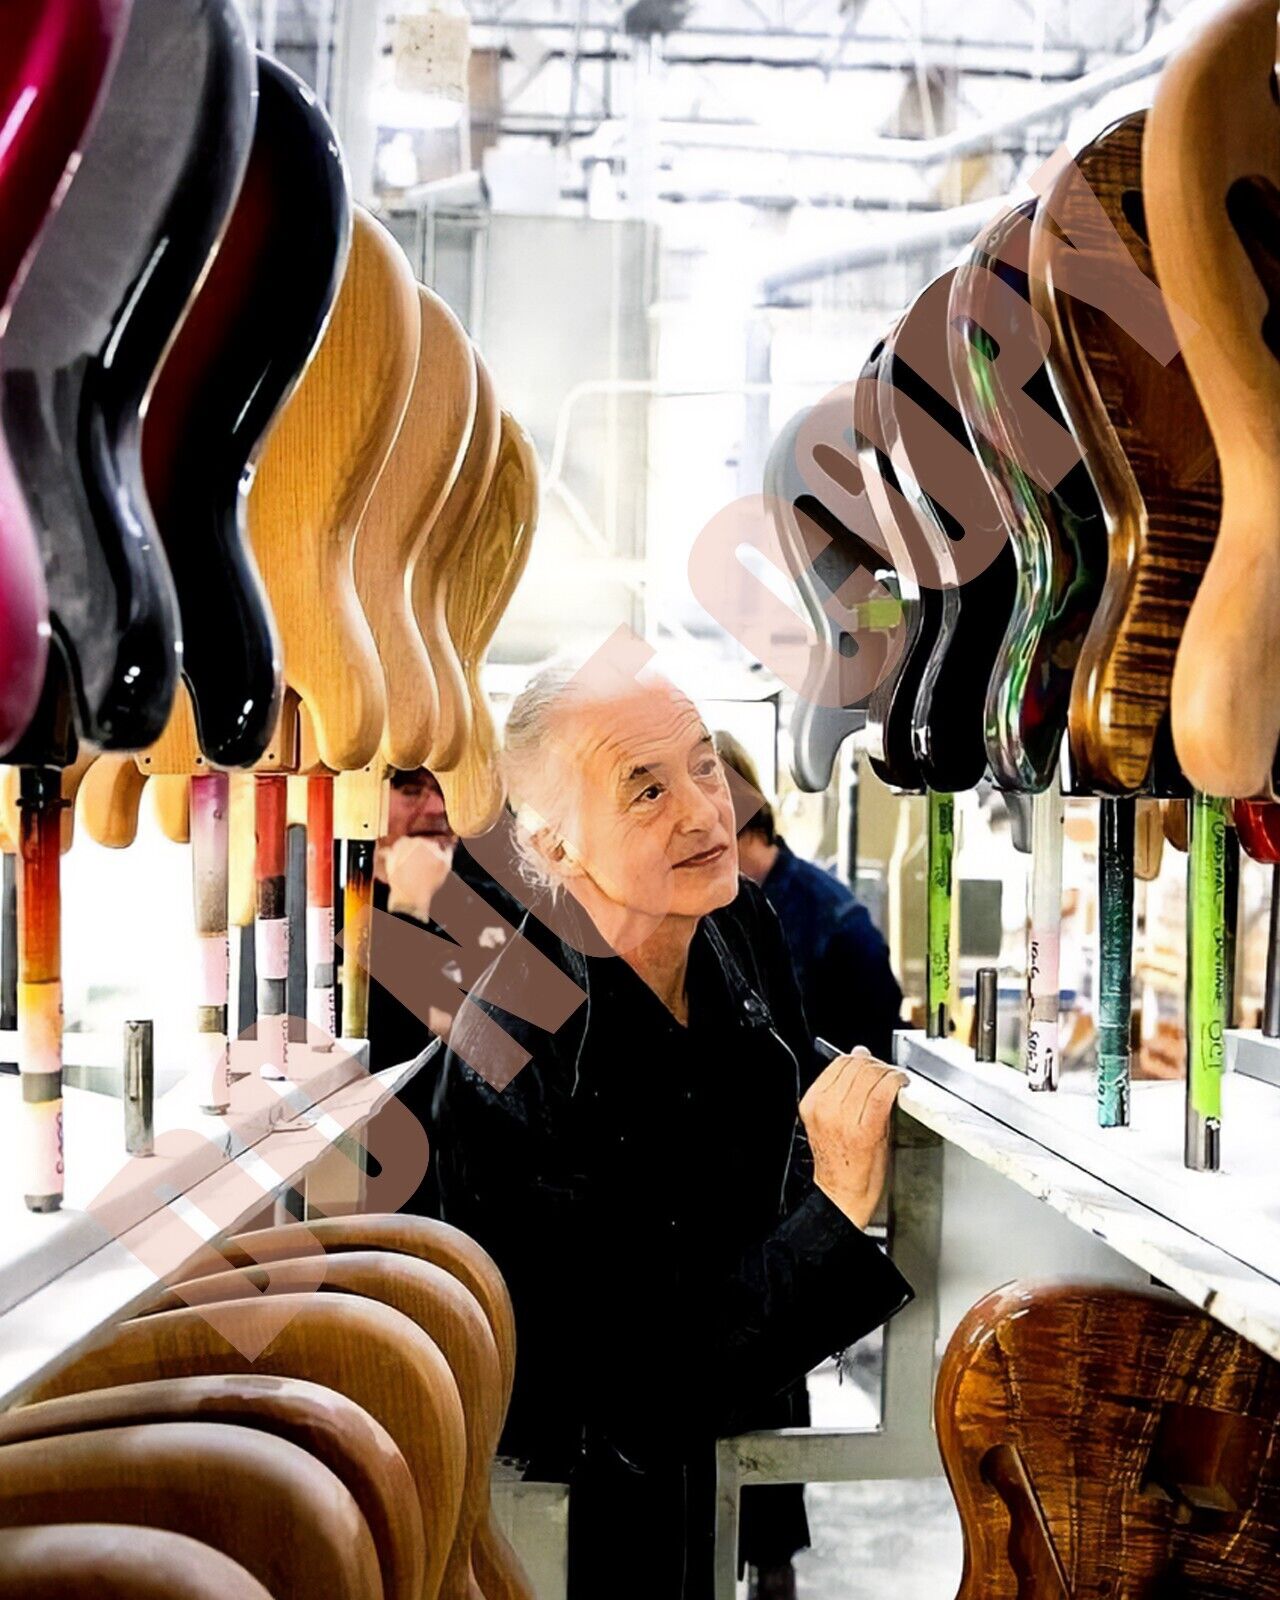 Jimmy Page From Led Zeppelin Looking At Guitars In Music Store 8x10 Photo